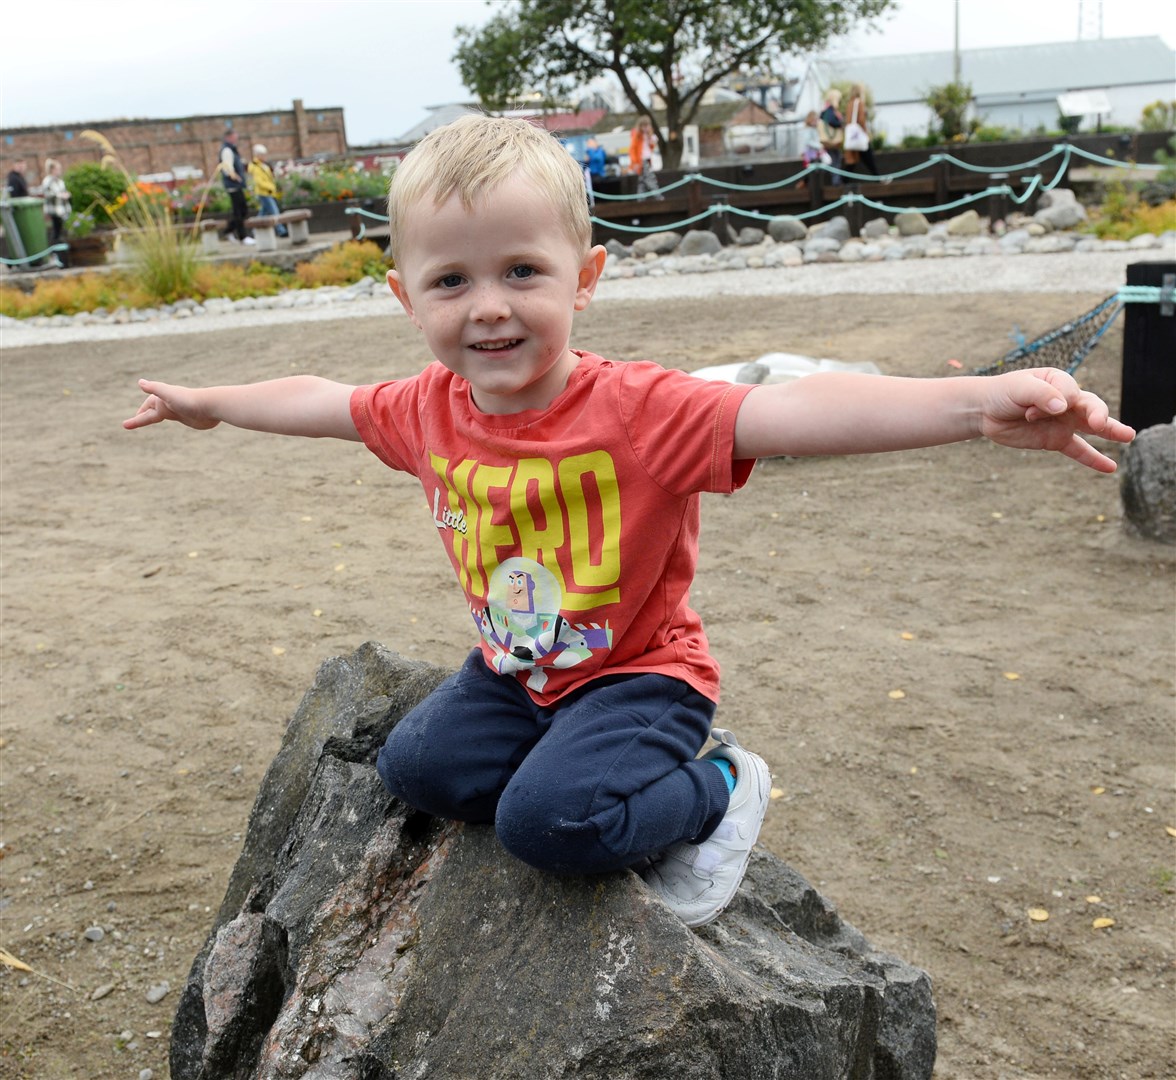 At a Invergordon Development Trust open air market at Natal Garden, Elliot Chisholm climbs the stones. Picture: Gary Anthony